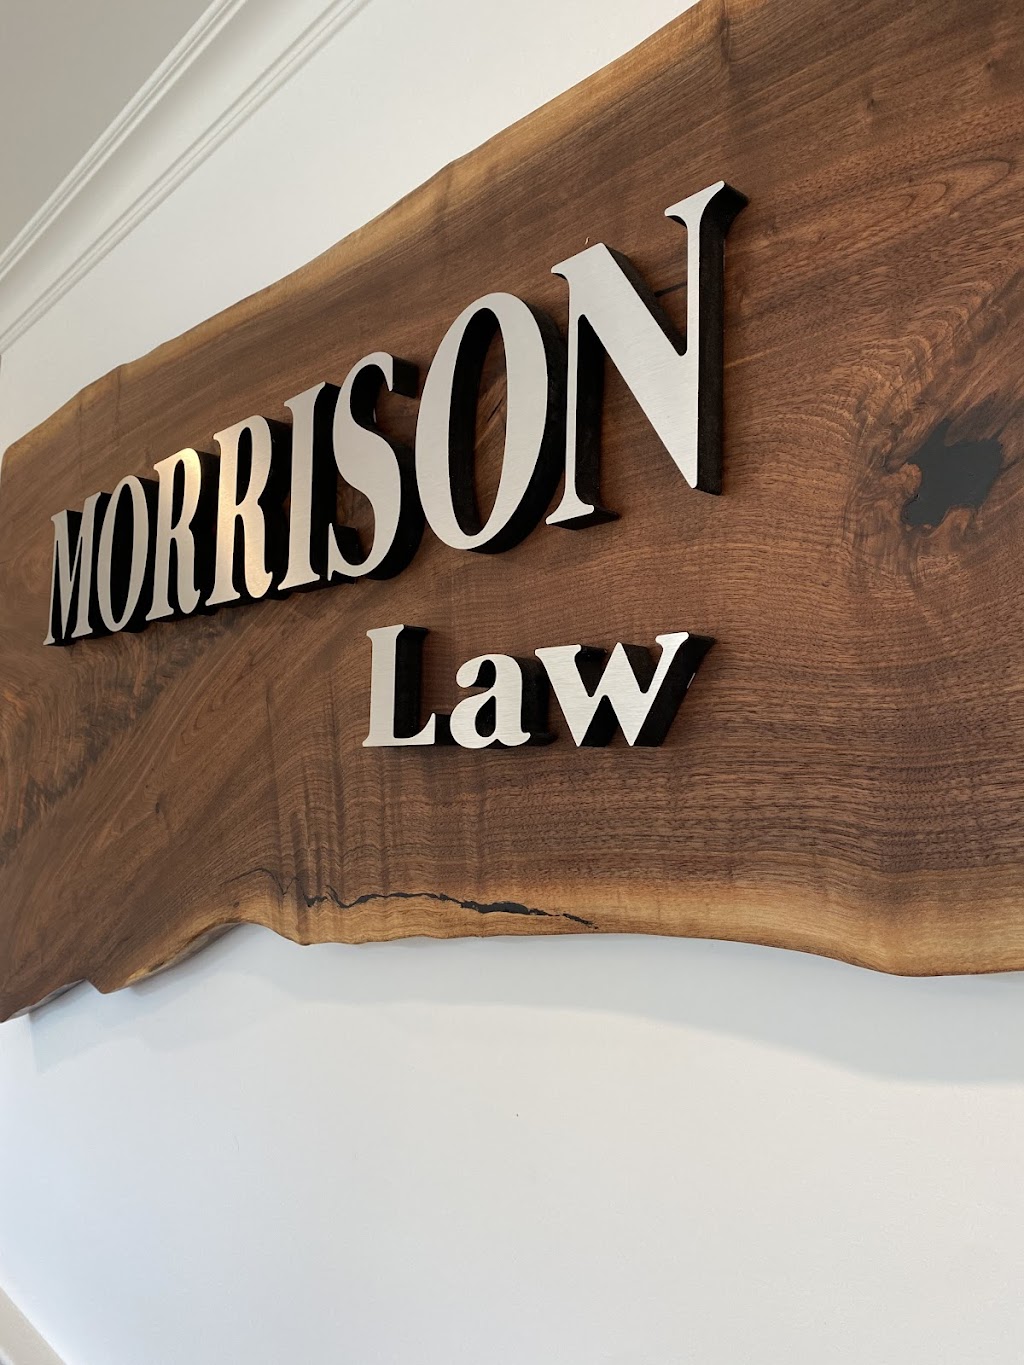 Curtis R. Morrison Attorney at Law, LLC | 159 Rocky Point Rd, Middle Island, NY 11953 | Phone: (631) 775-7723